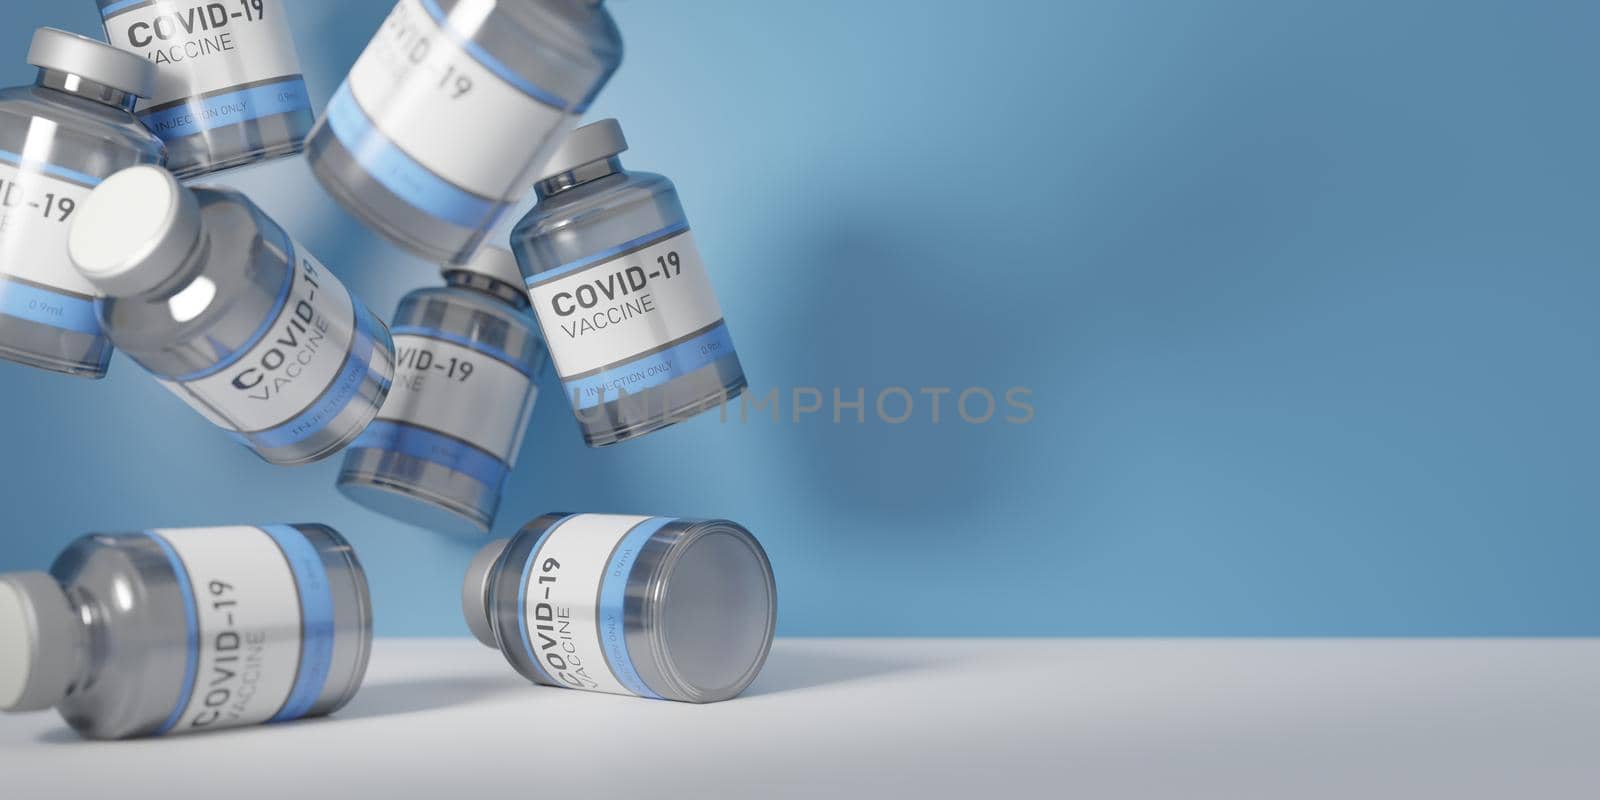 CORONAVIRUS VACCINE CANS FALLING ON WHITE TABLE WITH BLUE BACKGROUND. BANNER